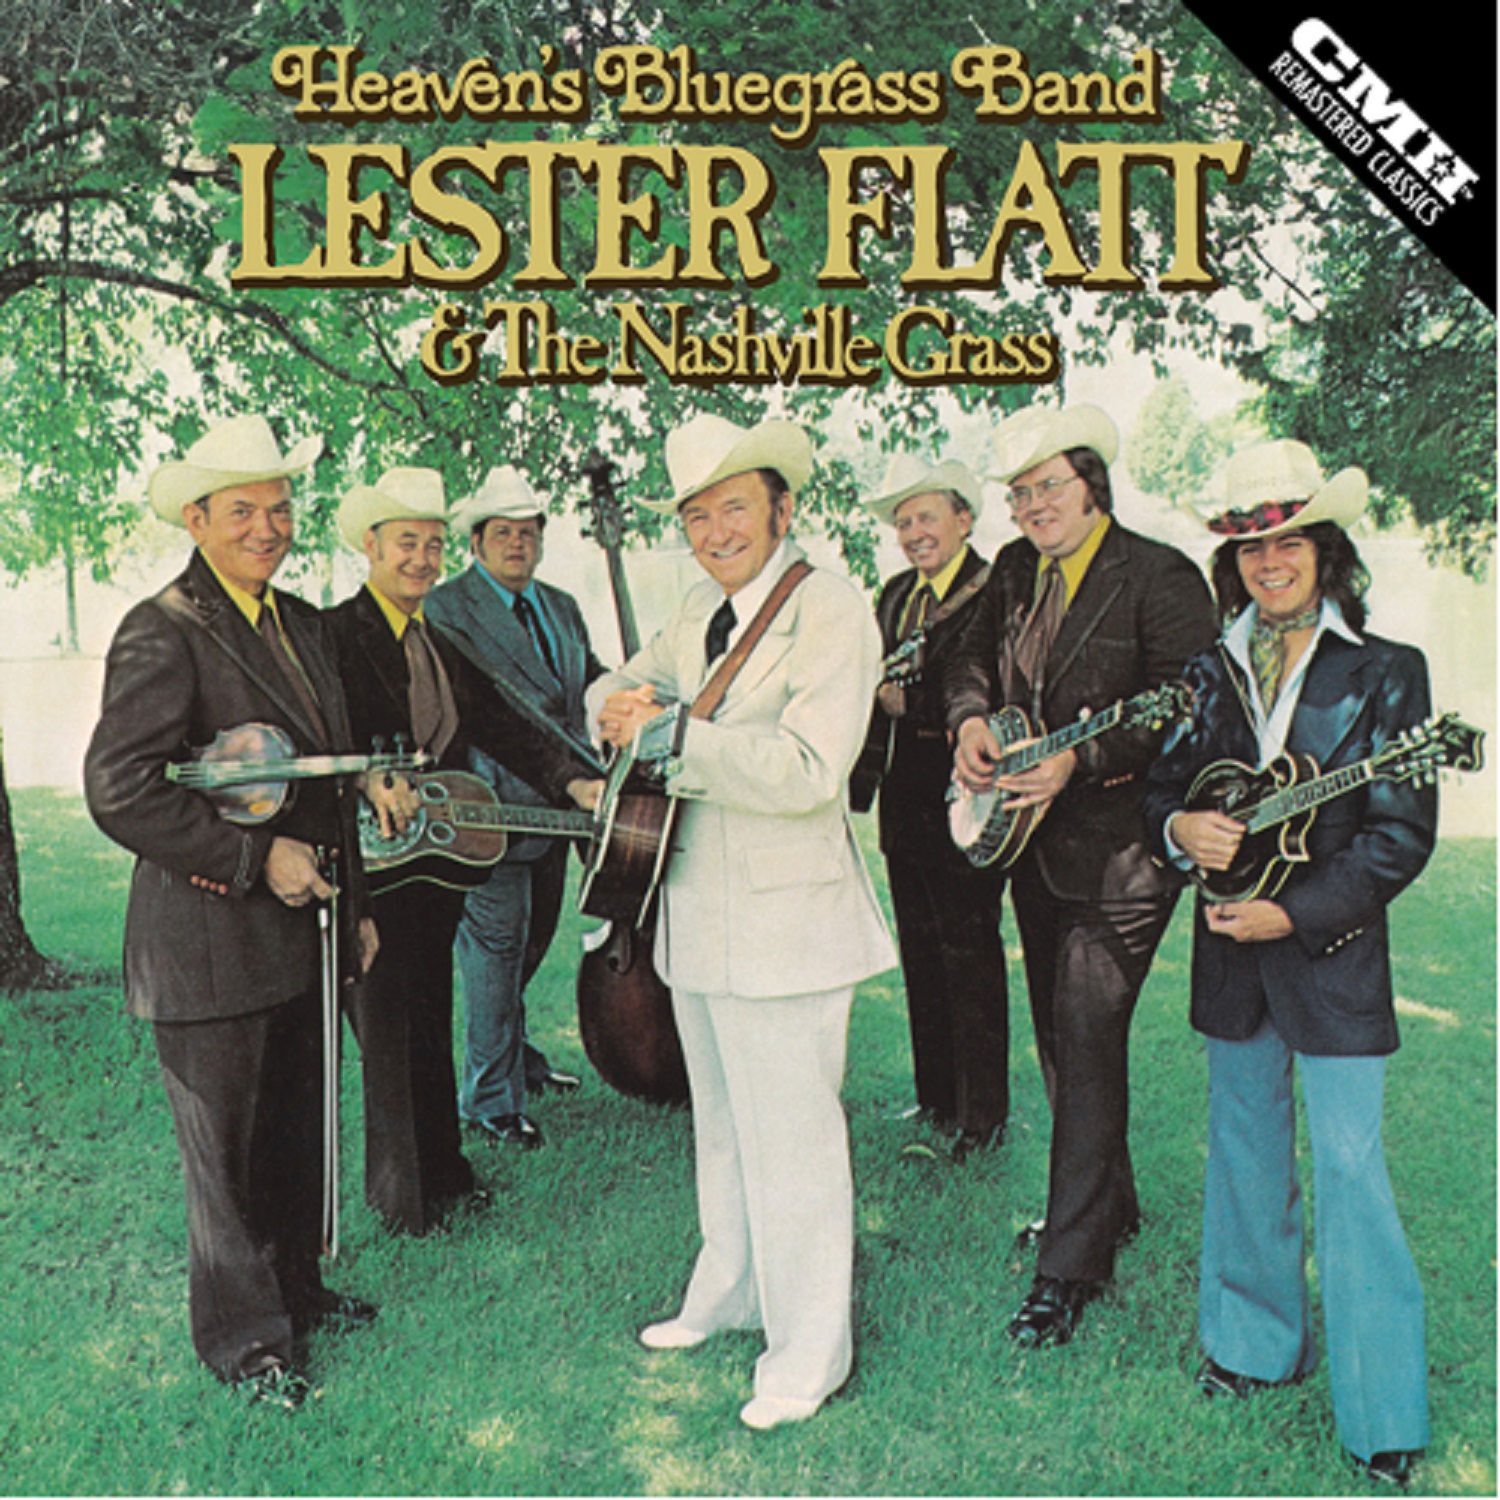 CMH Records Release Lester Flatt & The Nashville Grass’ 'Heaven’s Bluegrass Band' For The First Time Ever On CD, Digital & Streaming